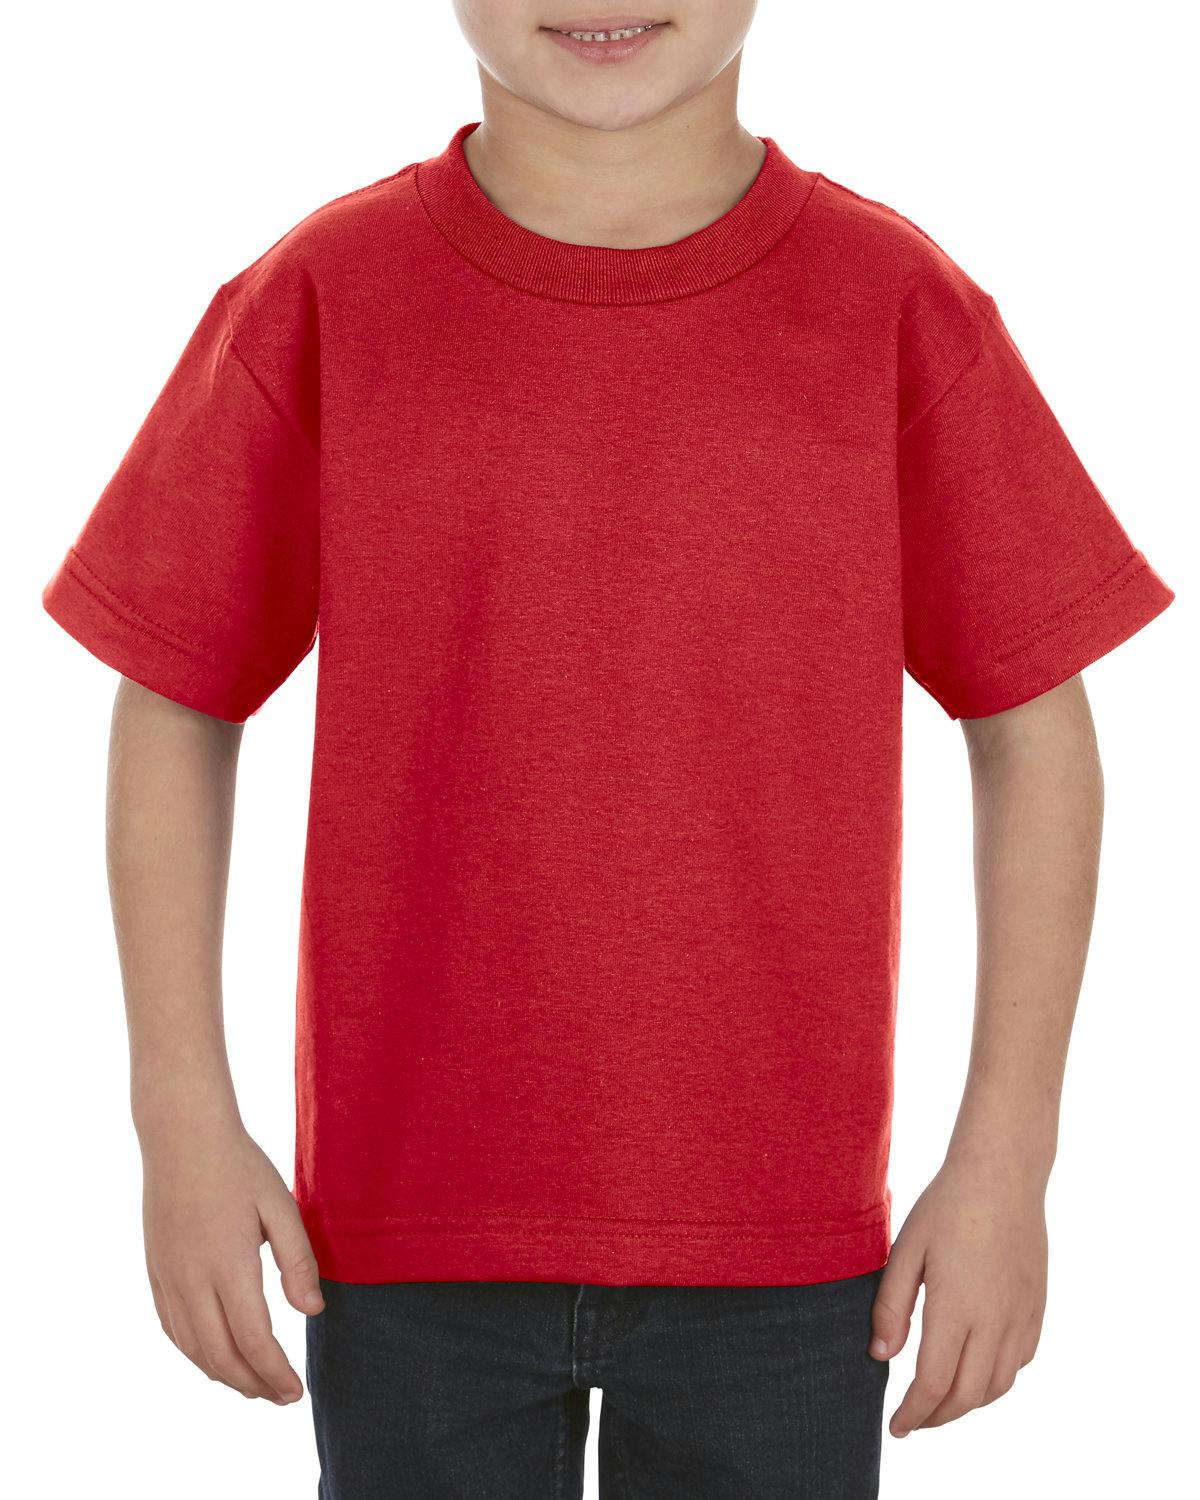 Image for Juvy 6.0 oz., 100% Cotton T-Shirt